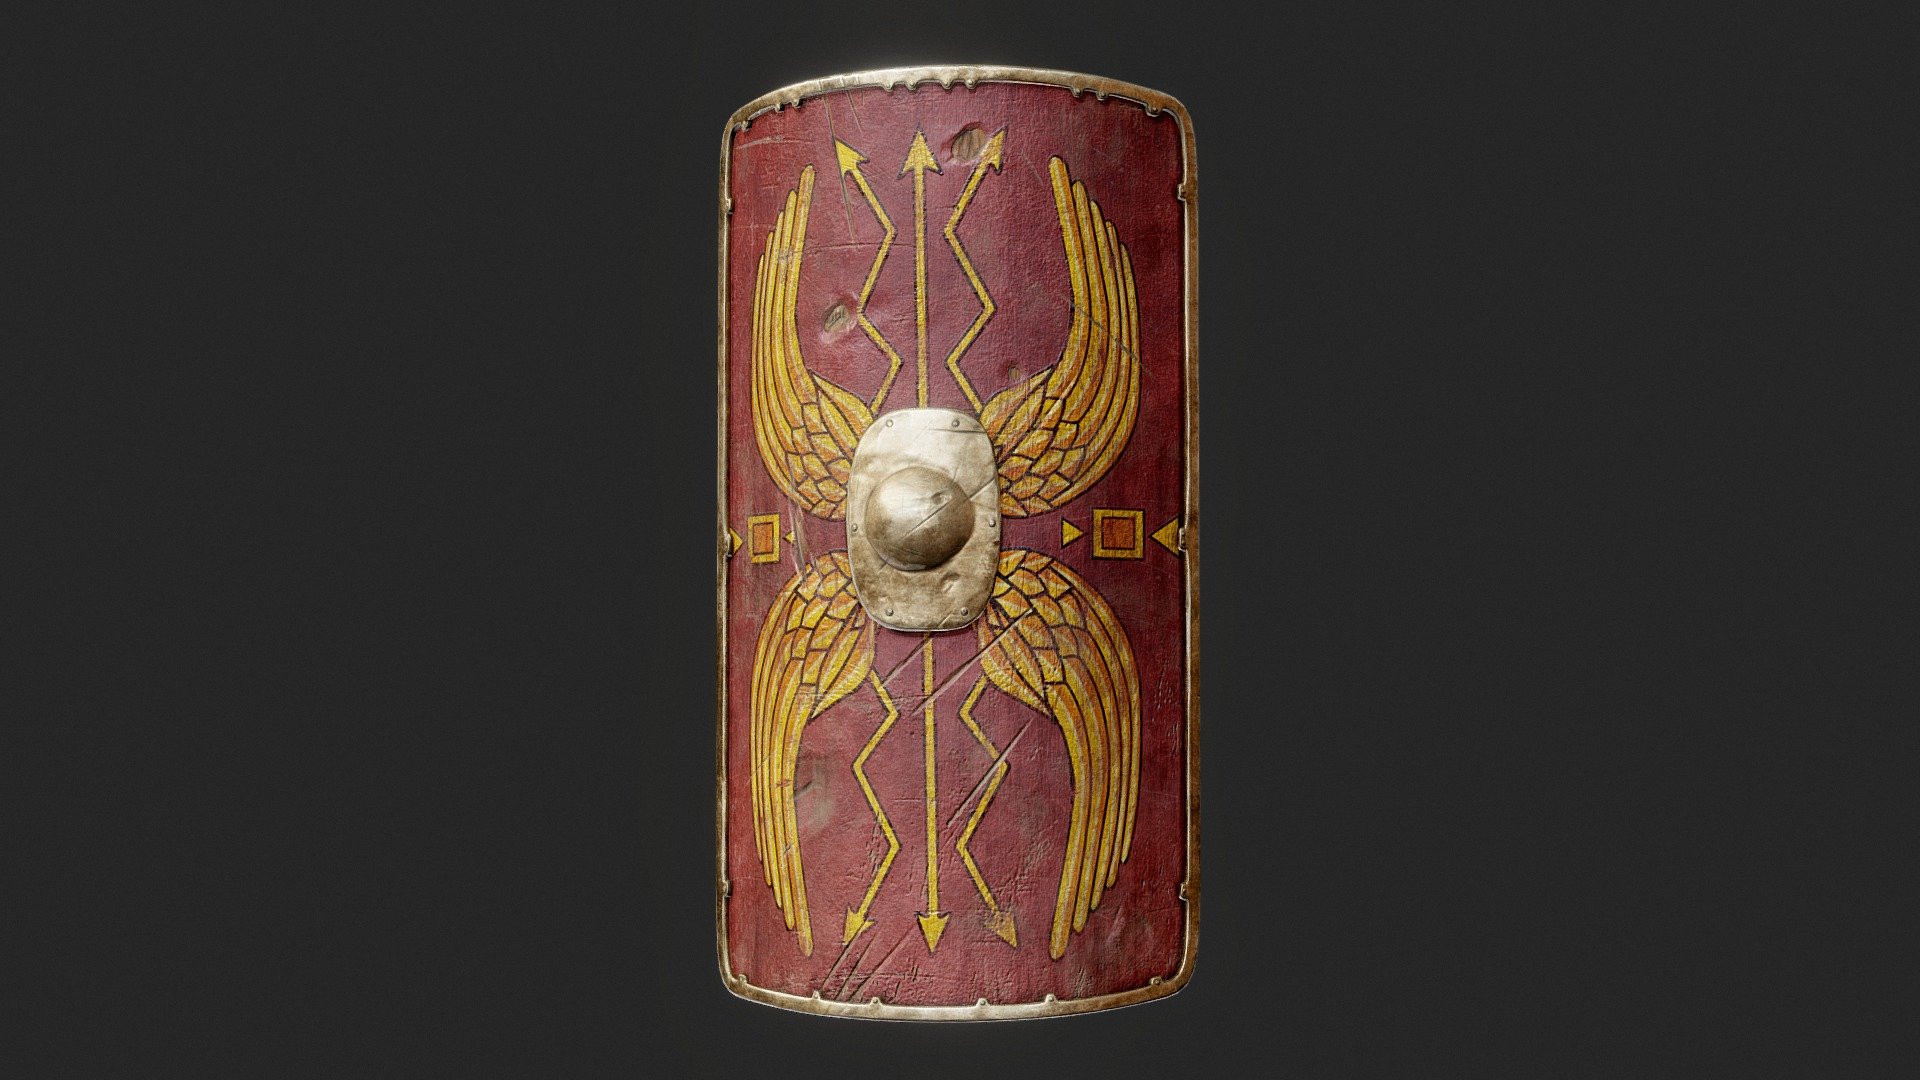 Appearing in the later 40 or 50 Century AD. A convex rectangular shield made of wood, glue, and a layer of canvas and calf skin. 

A metal rim protects the edges of the shield from splintering, and an Iron or bronze shield boss in the center that can deliver devastating defensive blows and stop projectiles. 

The scutum was the most prominent feature and constituted the primary protective armament of a roman legionarie.

Model made with Maya, Zbrush, Substance Painter 3d model